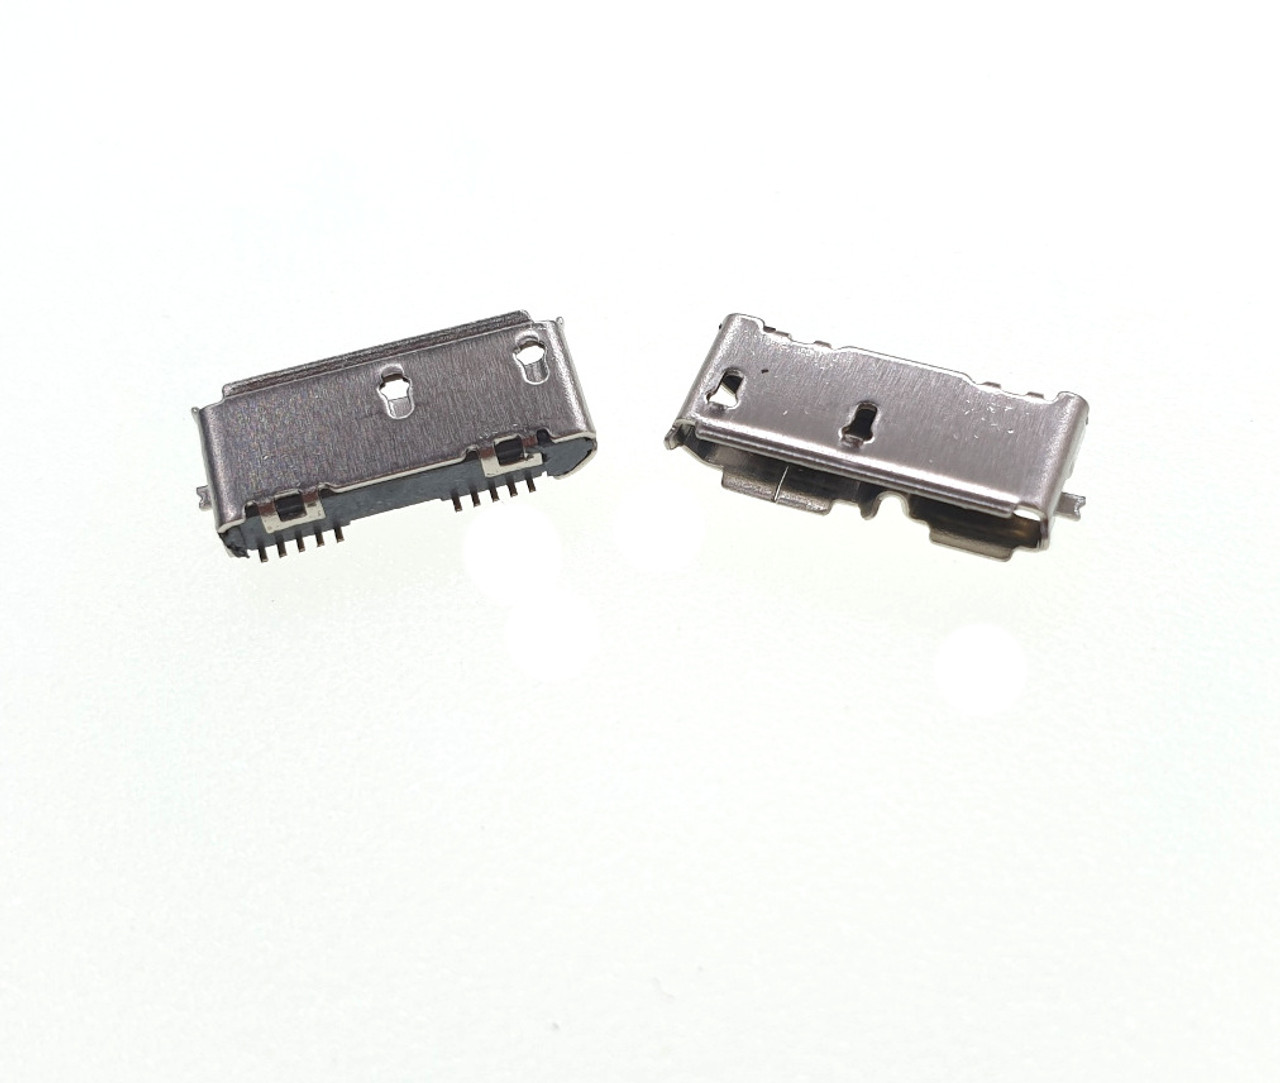 2x Micro USB 3.0 Socket Female Plug Replacement Port For HDD Computer Repair #E